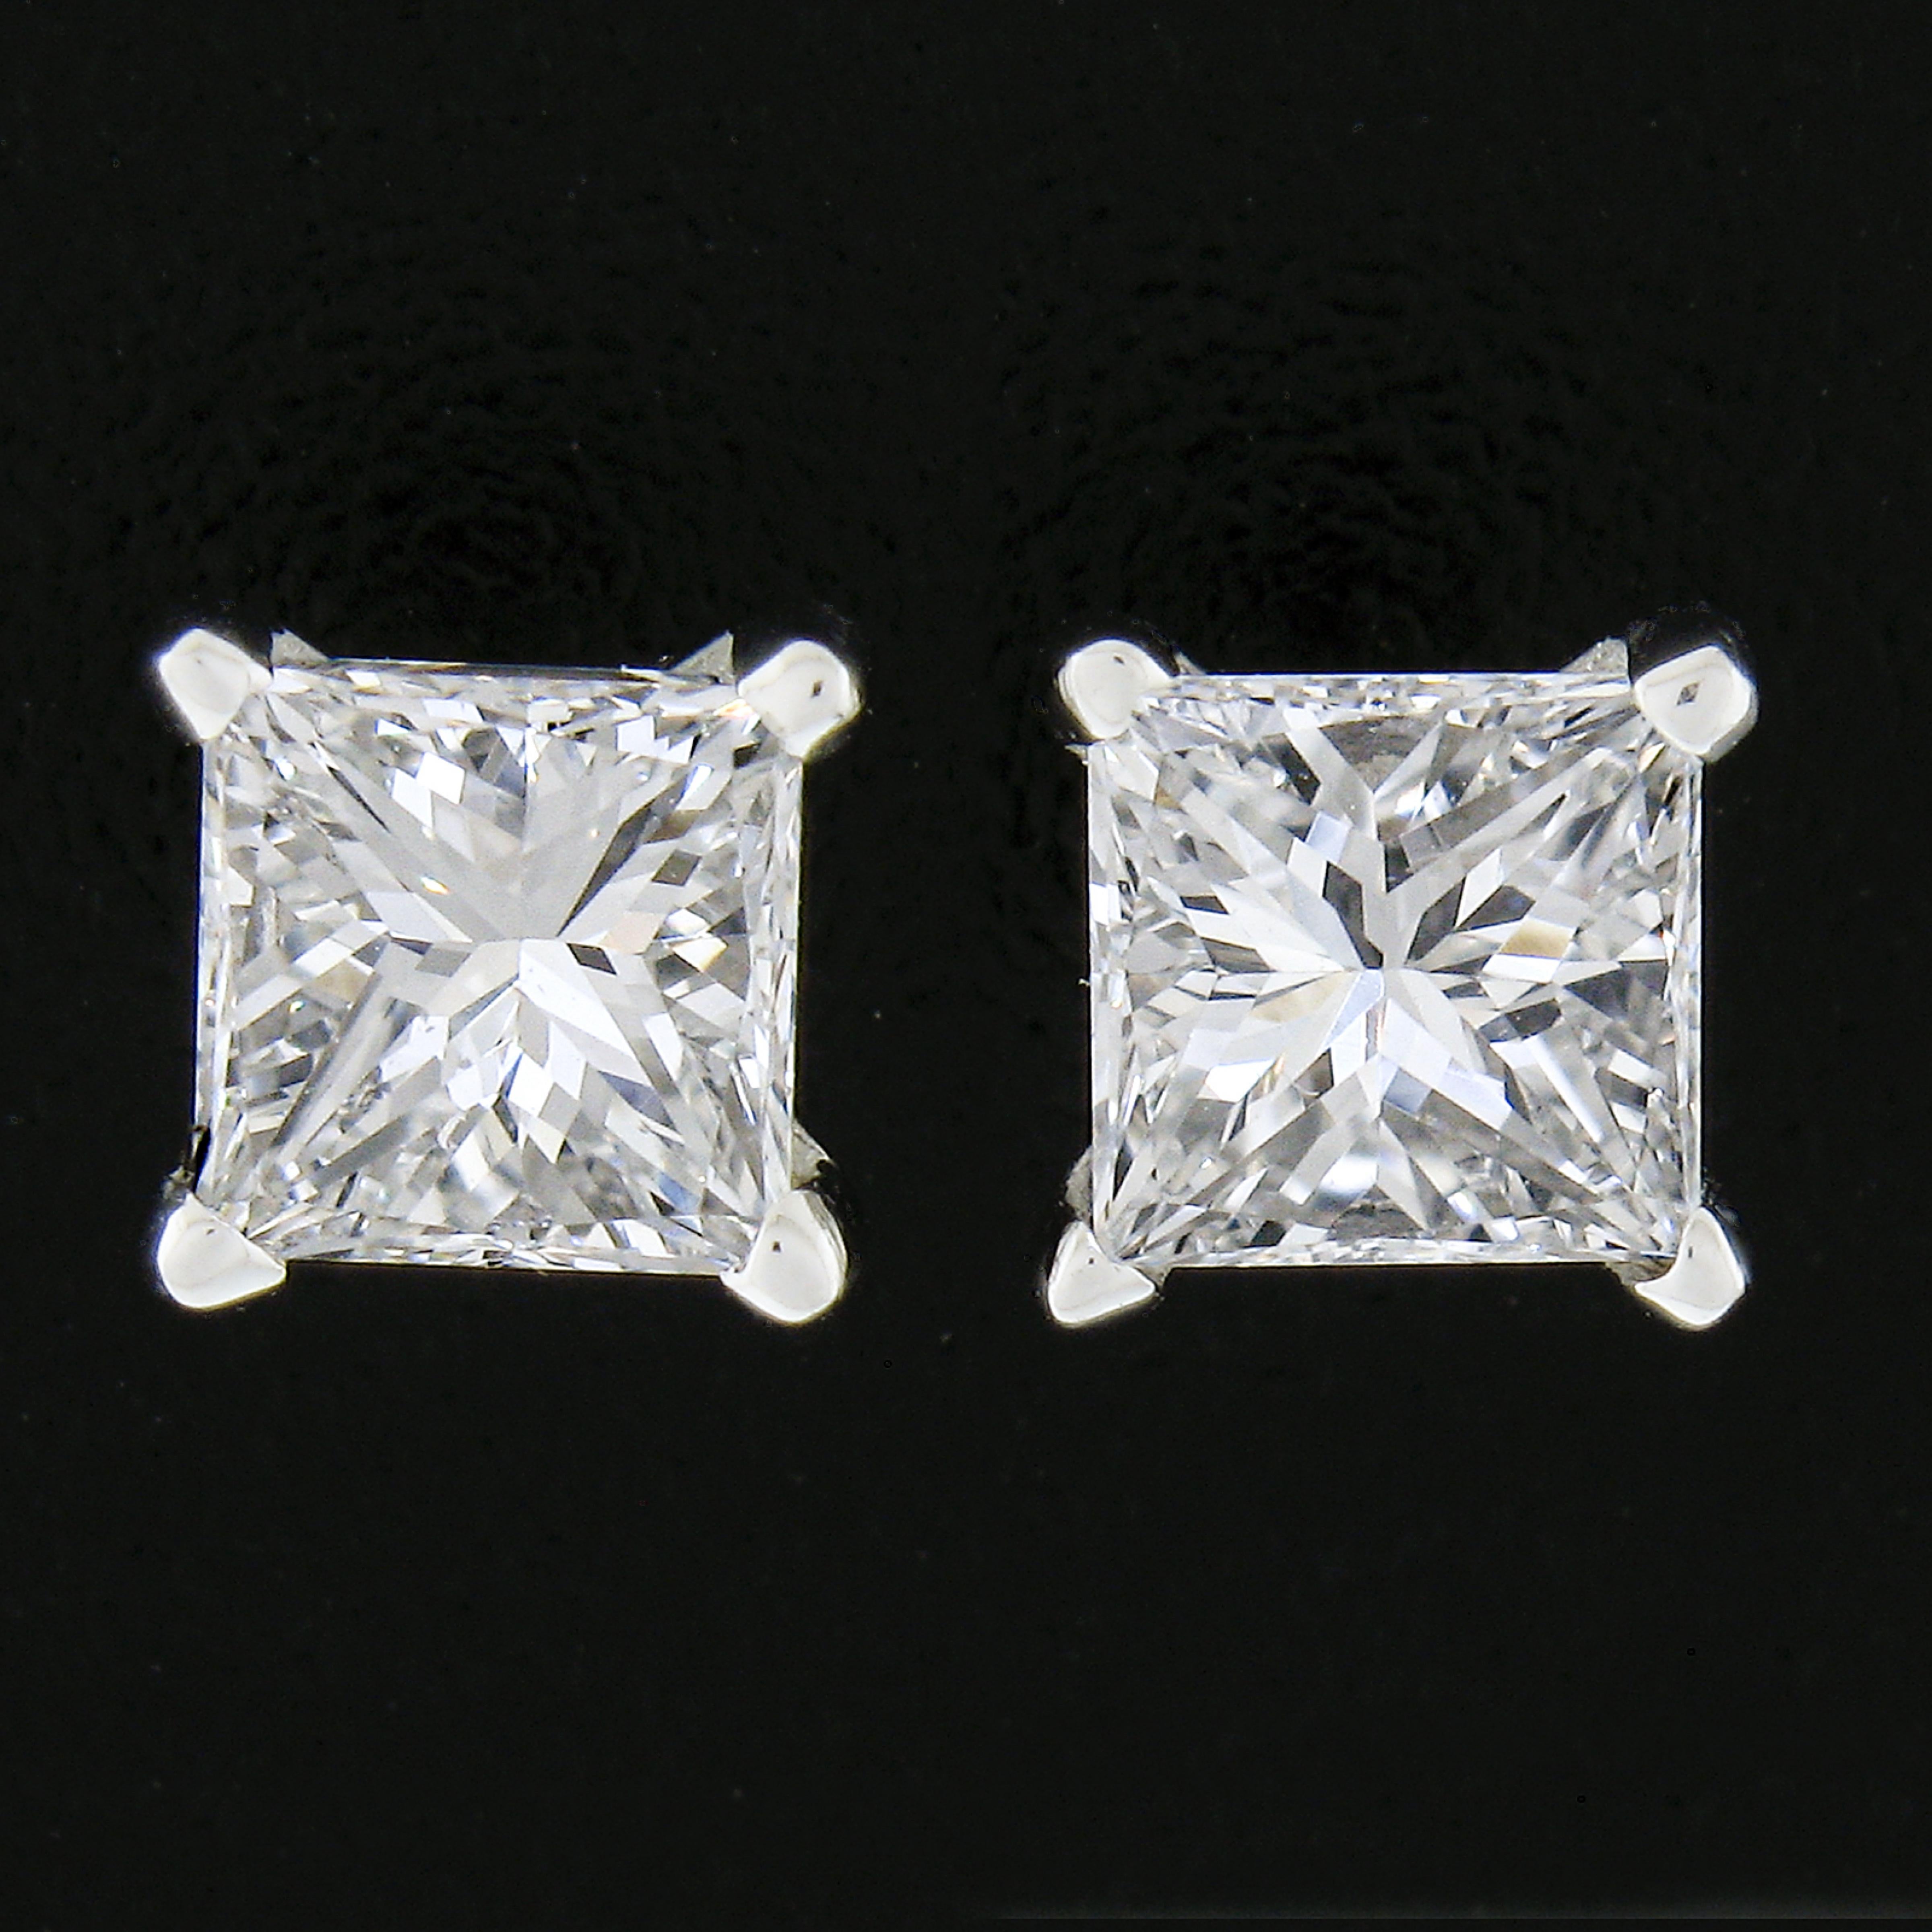 This stunning pair of diamond stud earrings was newly crafted from solid 14k white gold and features two exceptionally brilliant and fiery, princess cut diamonds. The diamonds total exactly 0.82 carats in weight and are very well matched with near